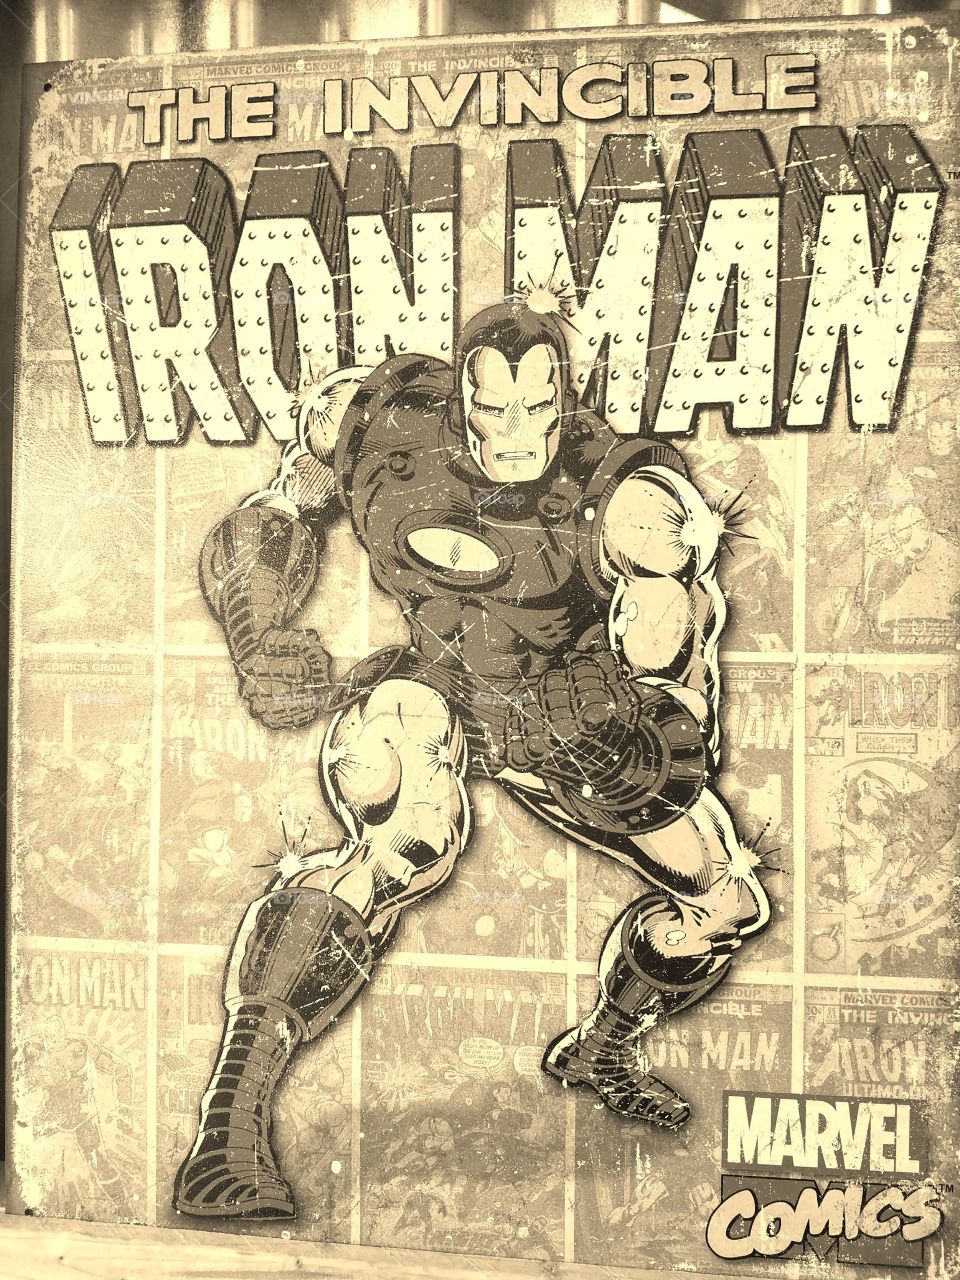 The Invincible Iron Man - Marvel Comics.  Poster in Sepia.